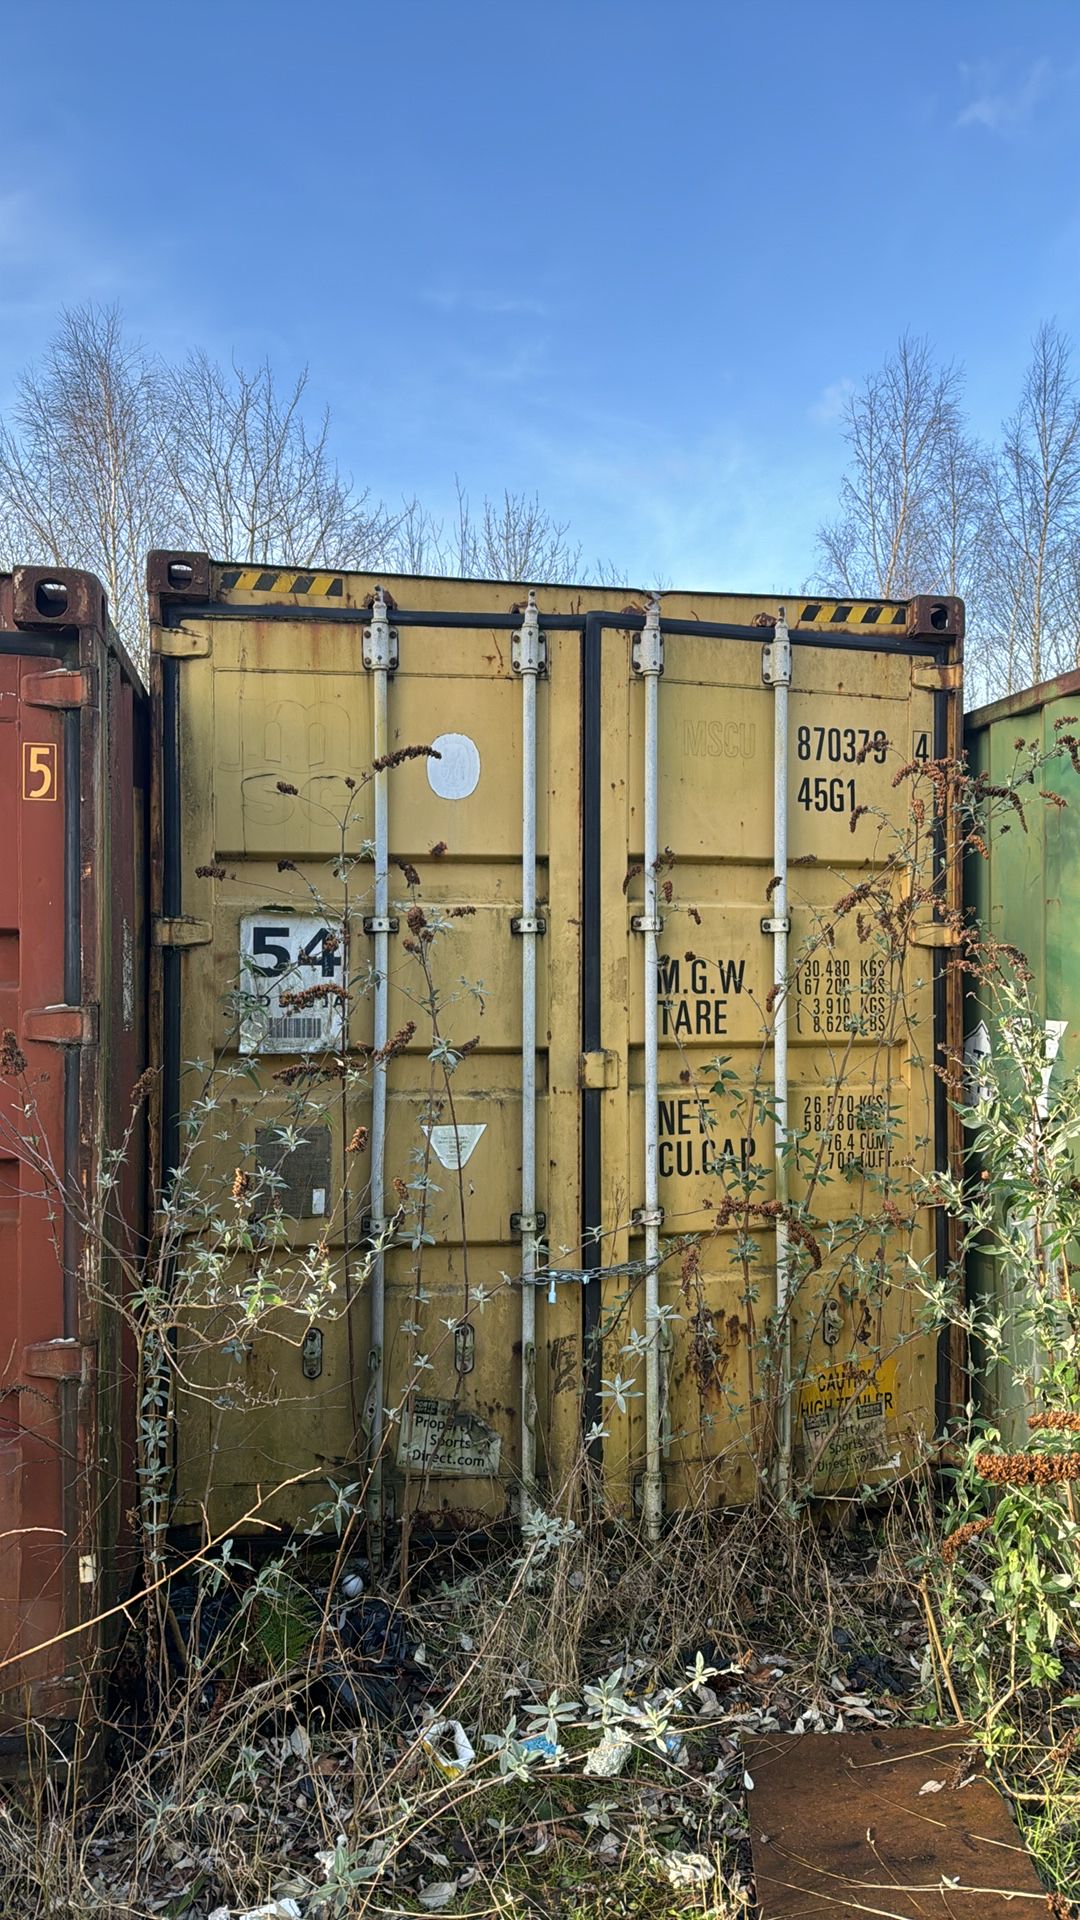 Shipping container, 51 (mSCU870379445G1)